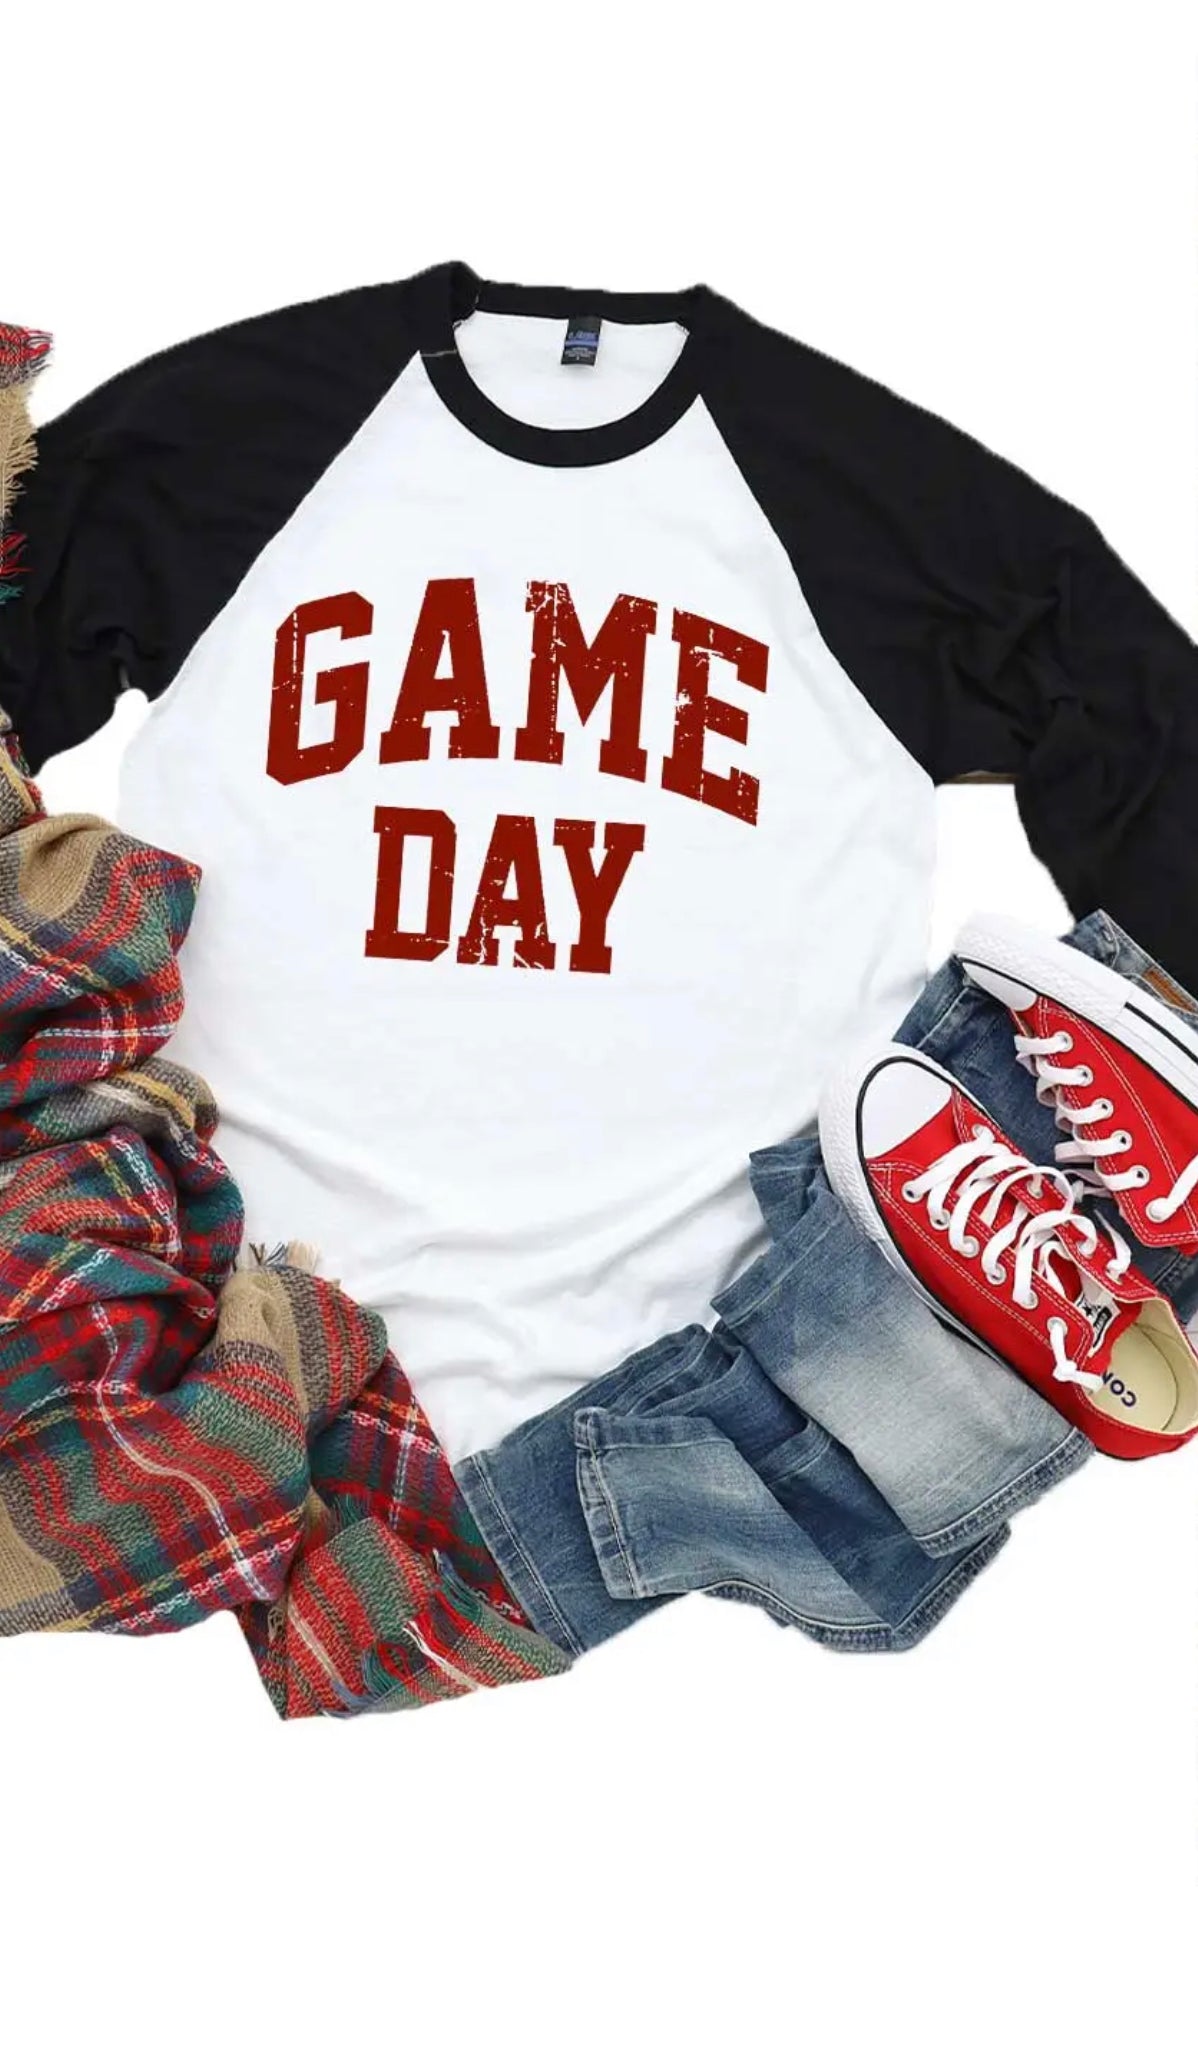 Game day youth tee